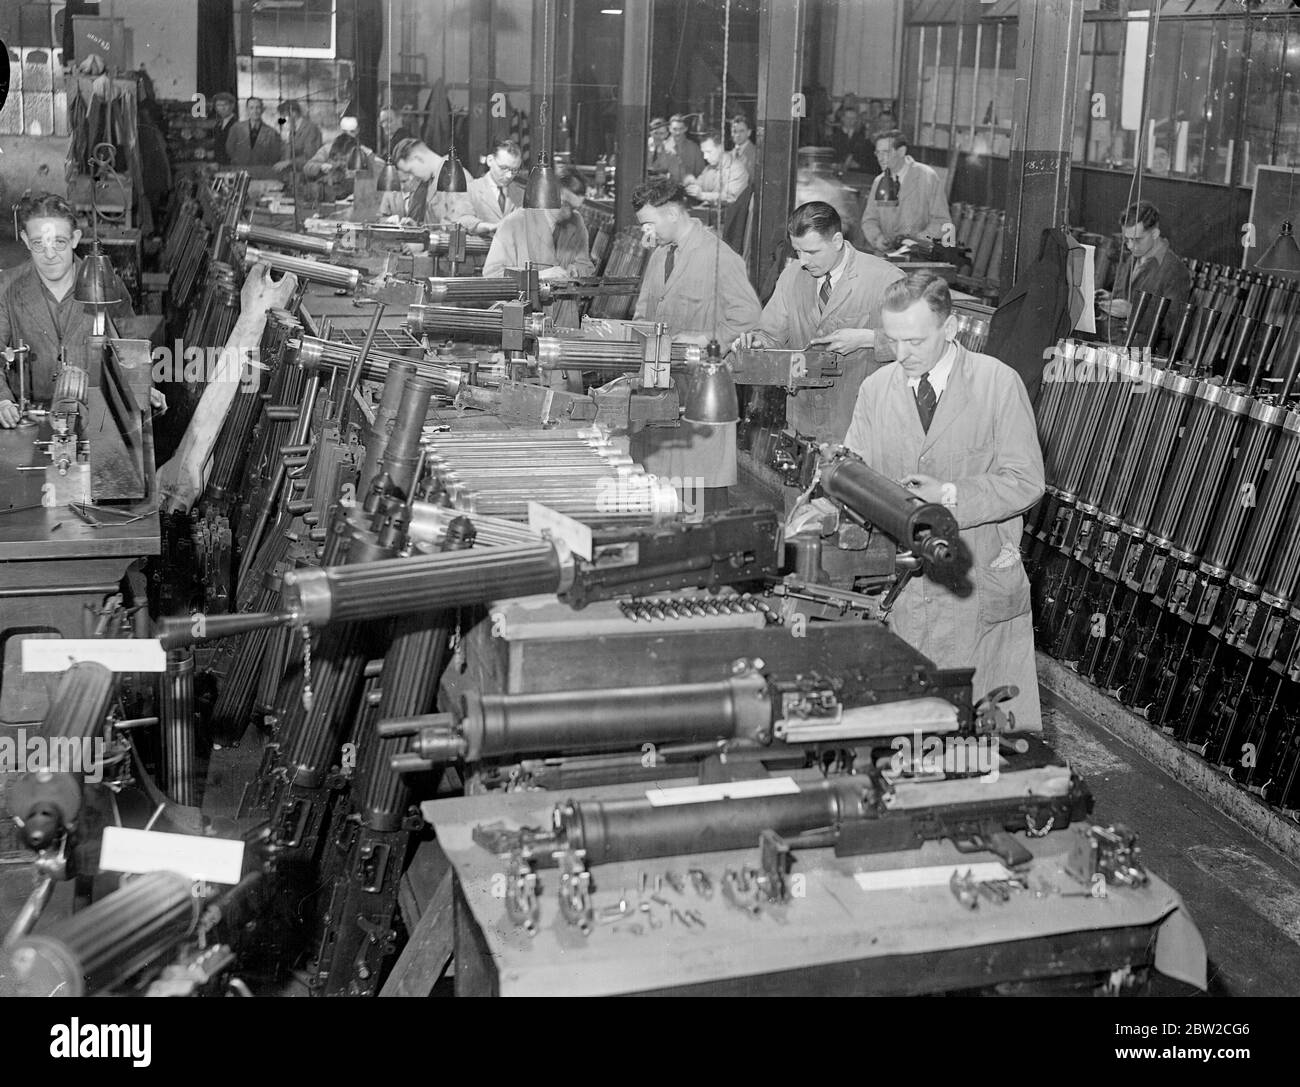 Turning out small arms by the thousand in a British factory. These pictures were made in a Royal Ordinance factory of the Ministry of Supply specialising in the production of small arms. Here, thousands of weapons such as machine guns, rifles and revolvers are being turned out at a high speed for the use of Britain's rapidly growing force. Photo shows Vickers machine guns in the making. 15 November 1939 Stock Photo